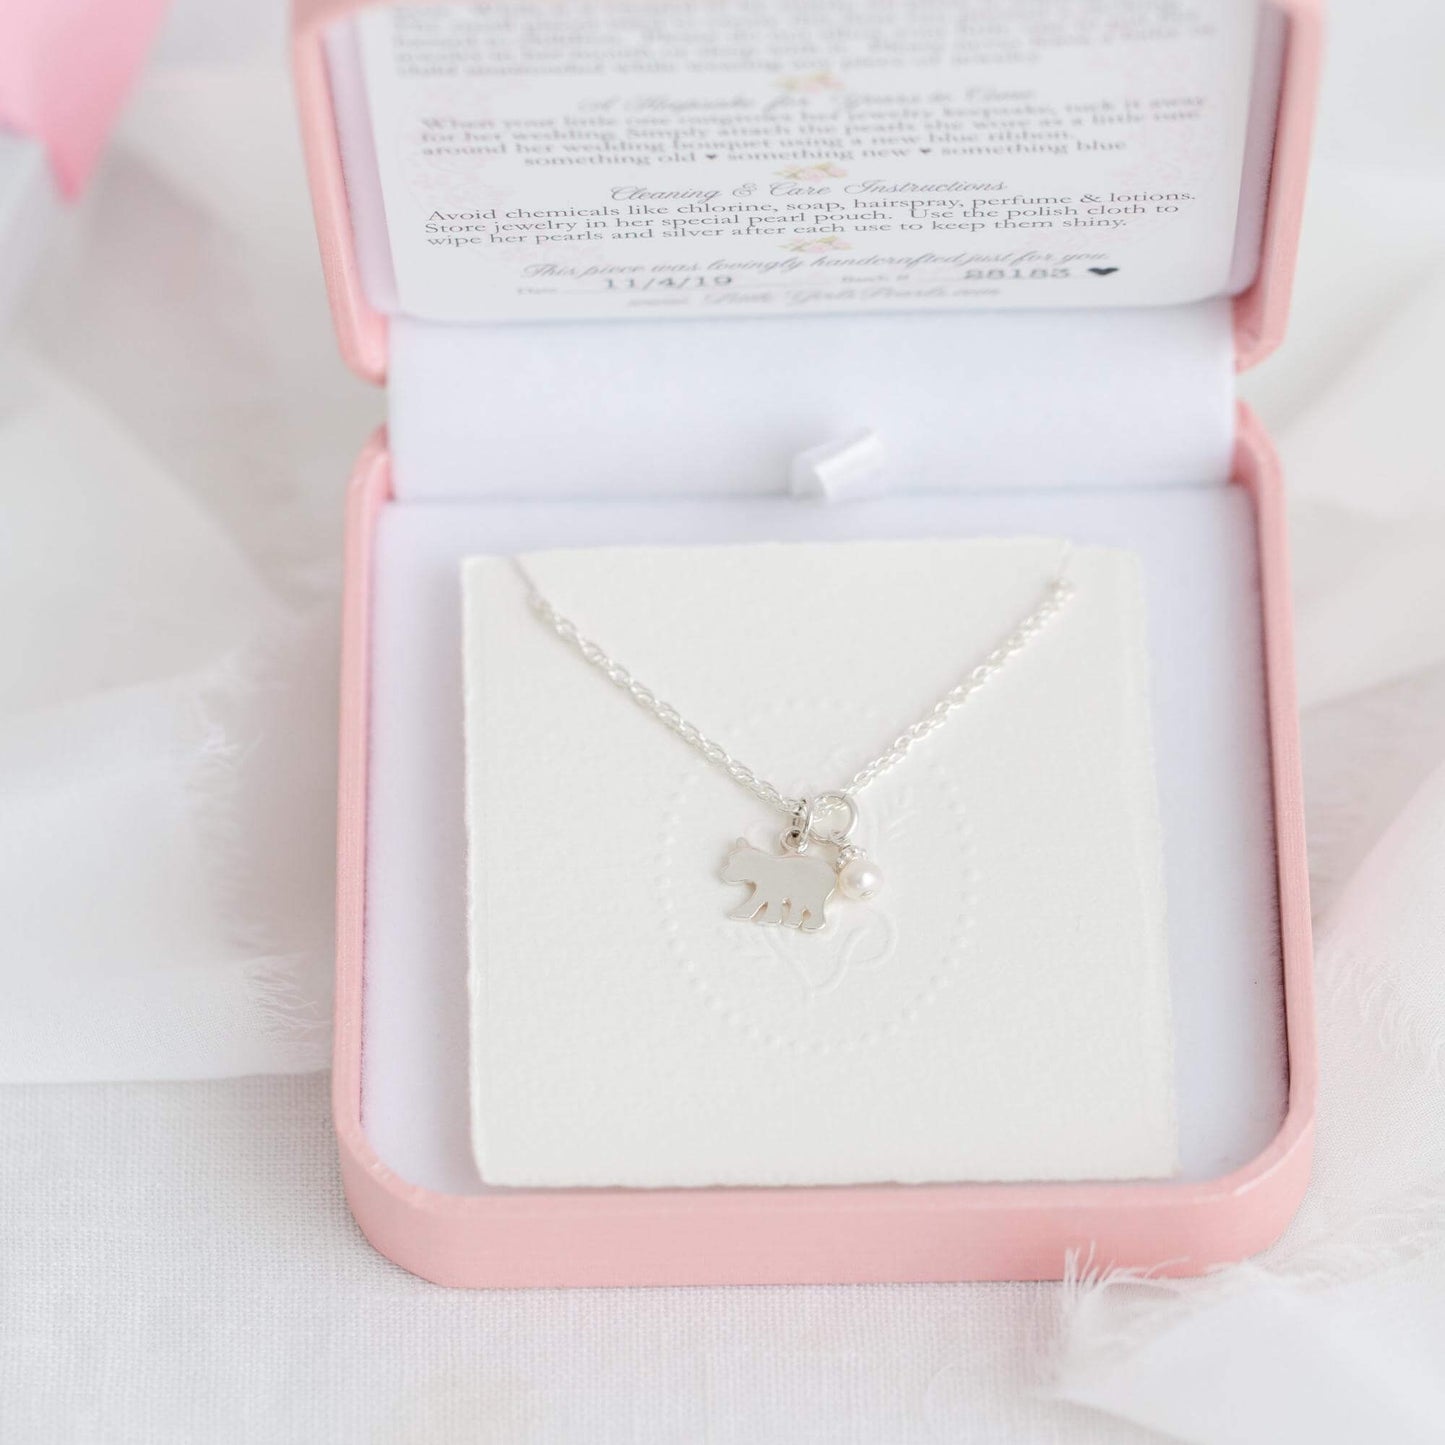 Itty Bitty Baby Bear Necklace